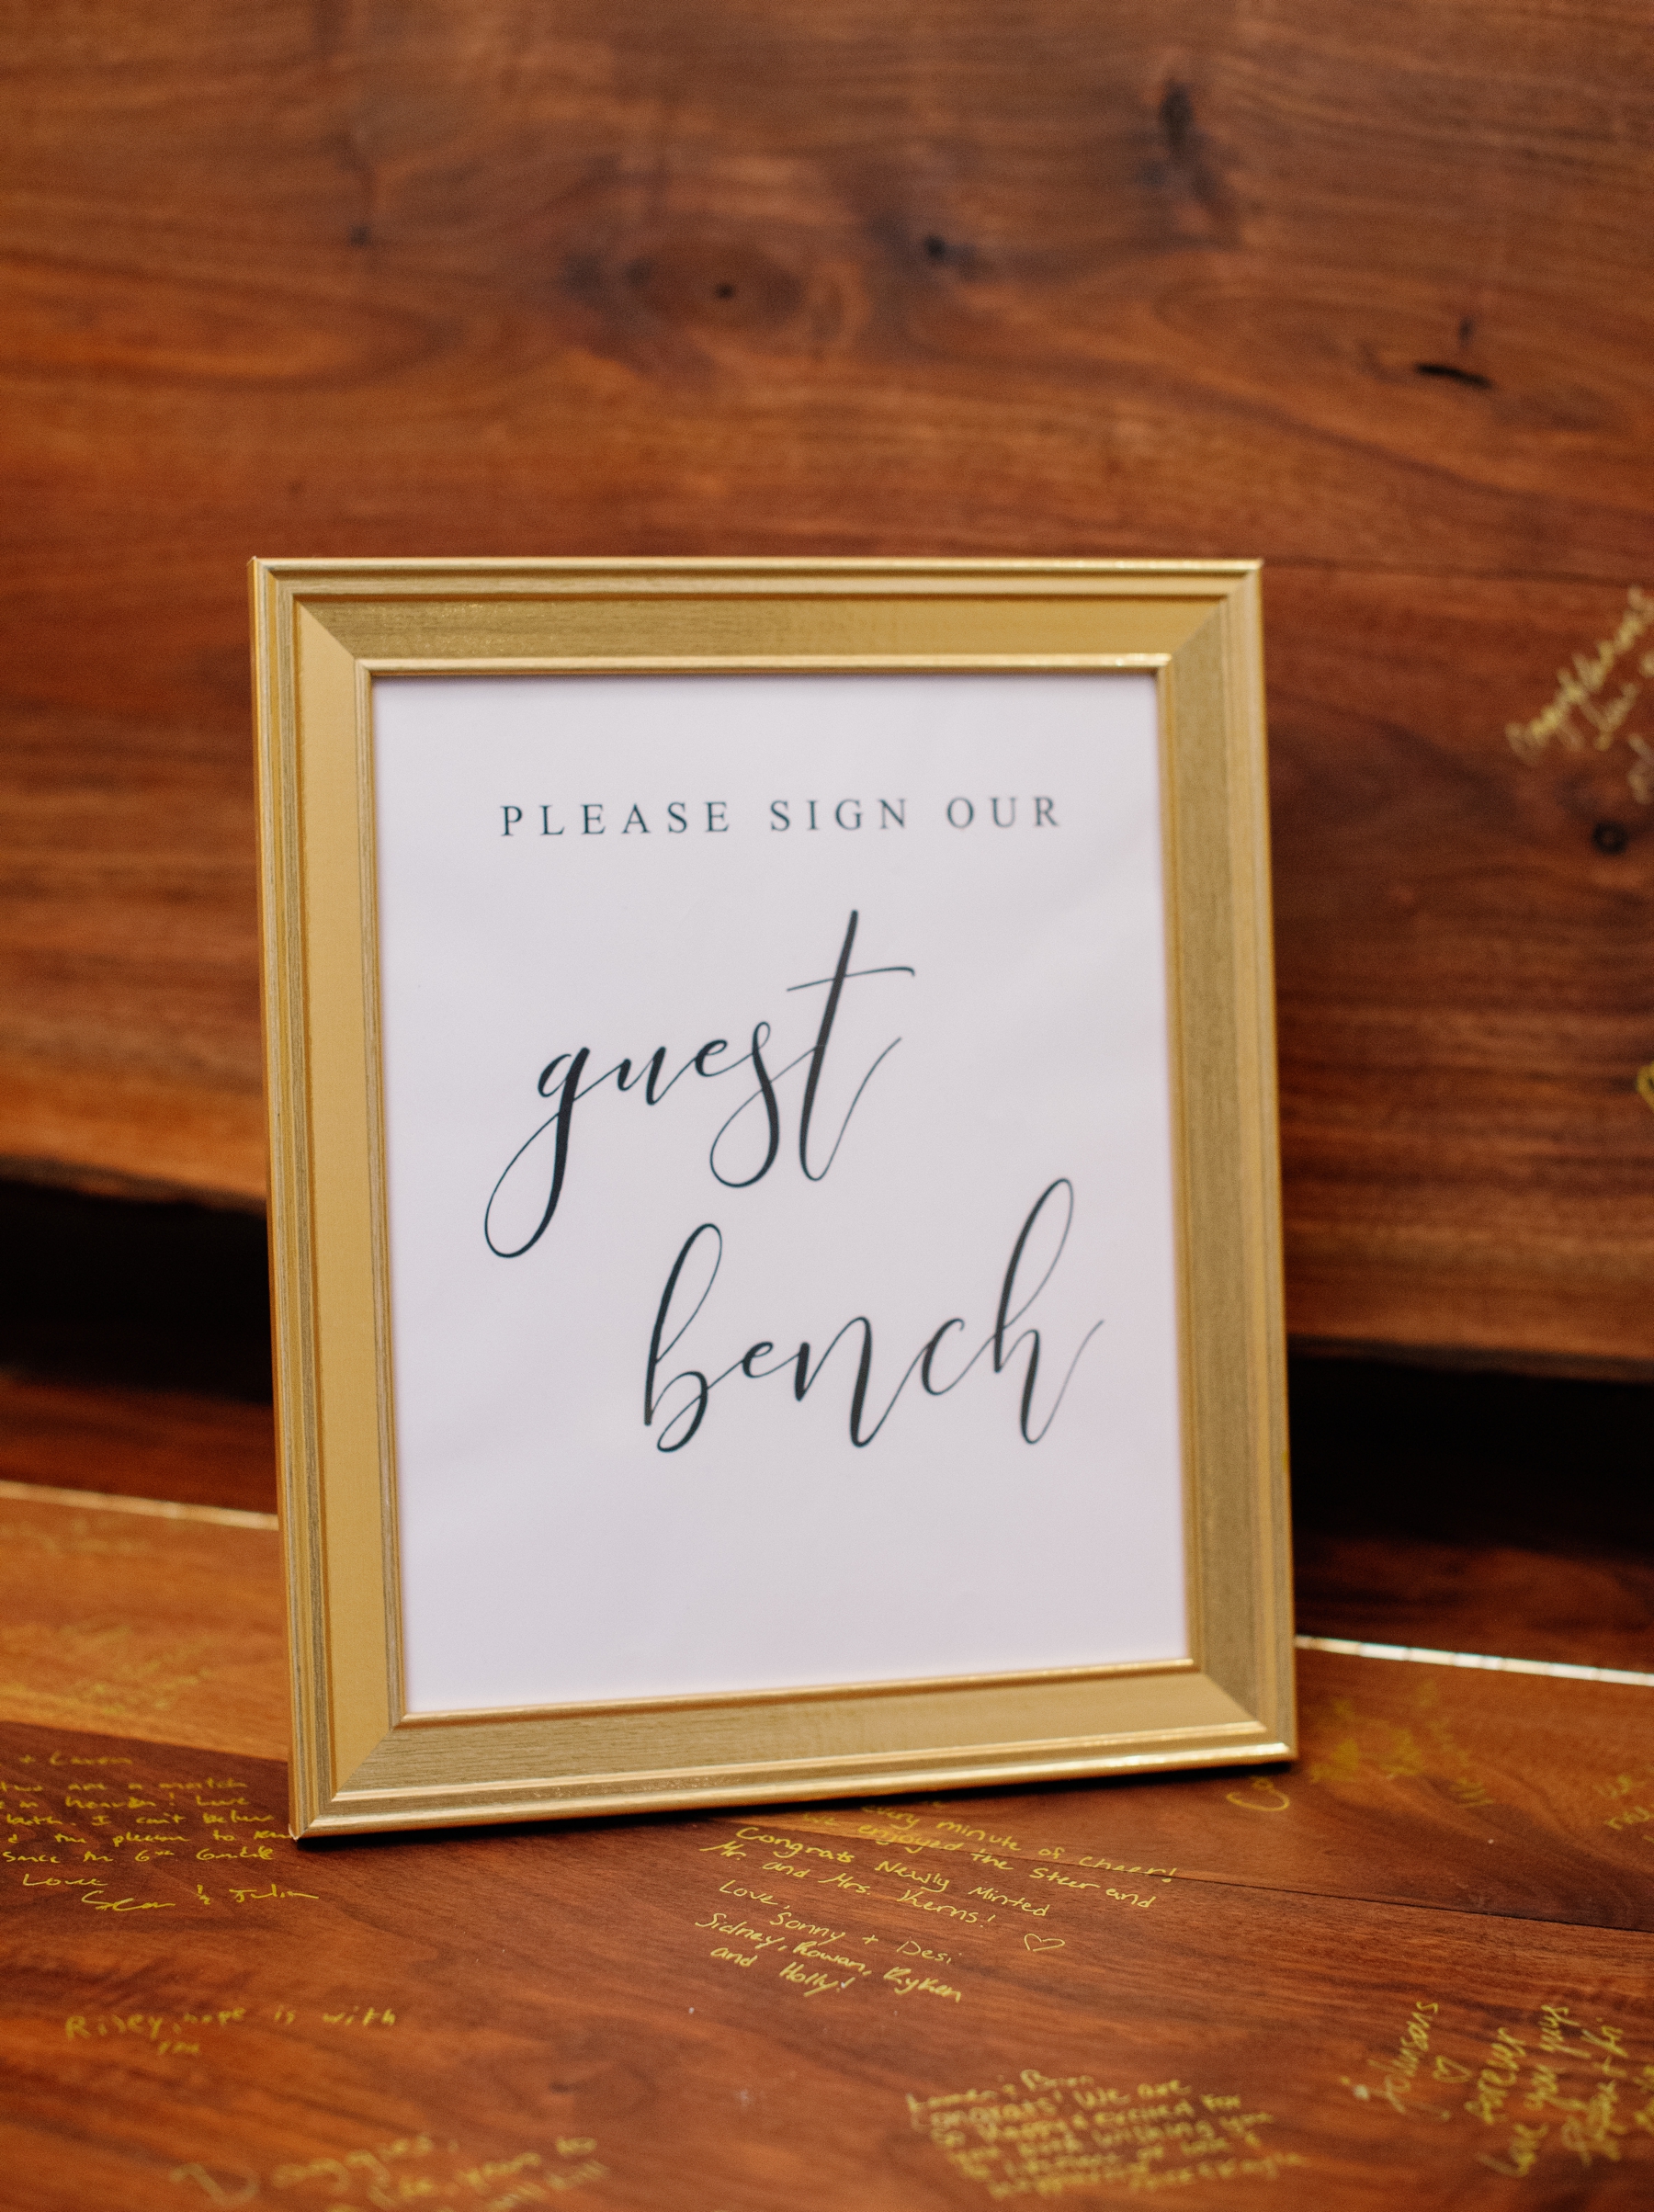 Please sign our guest bench sign